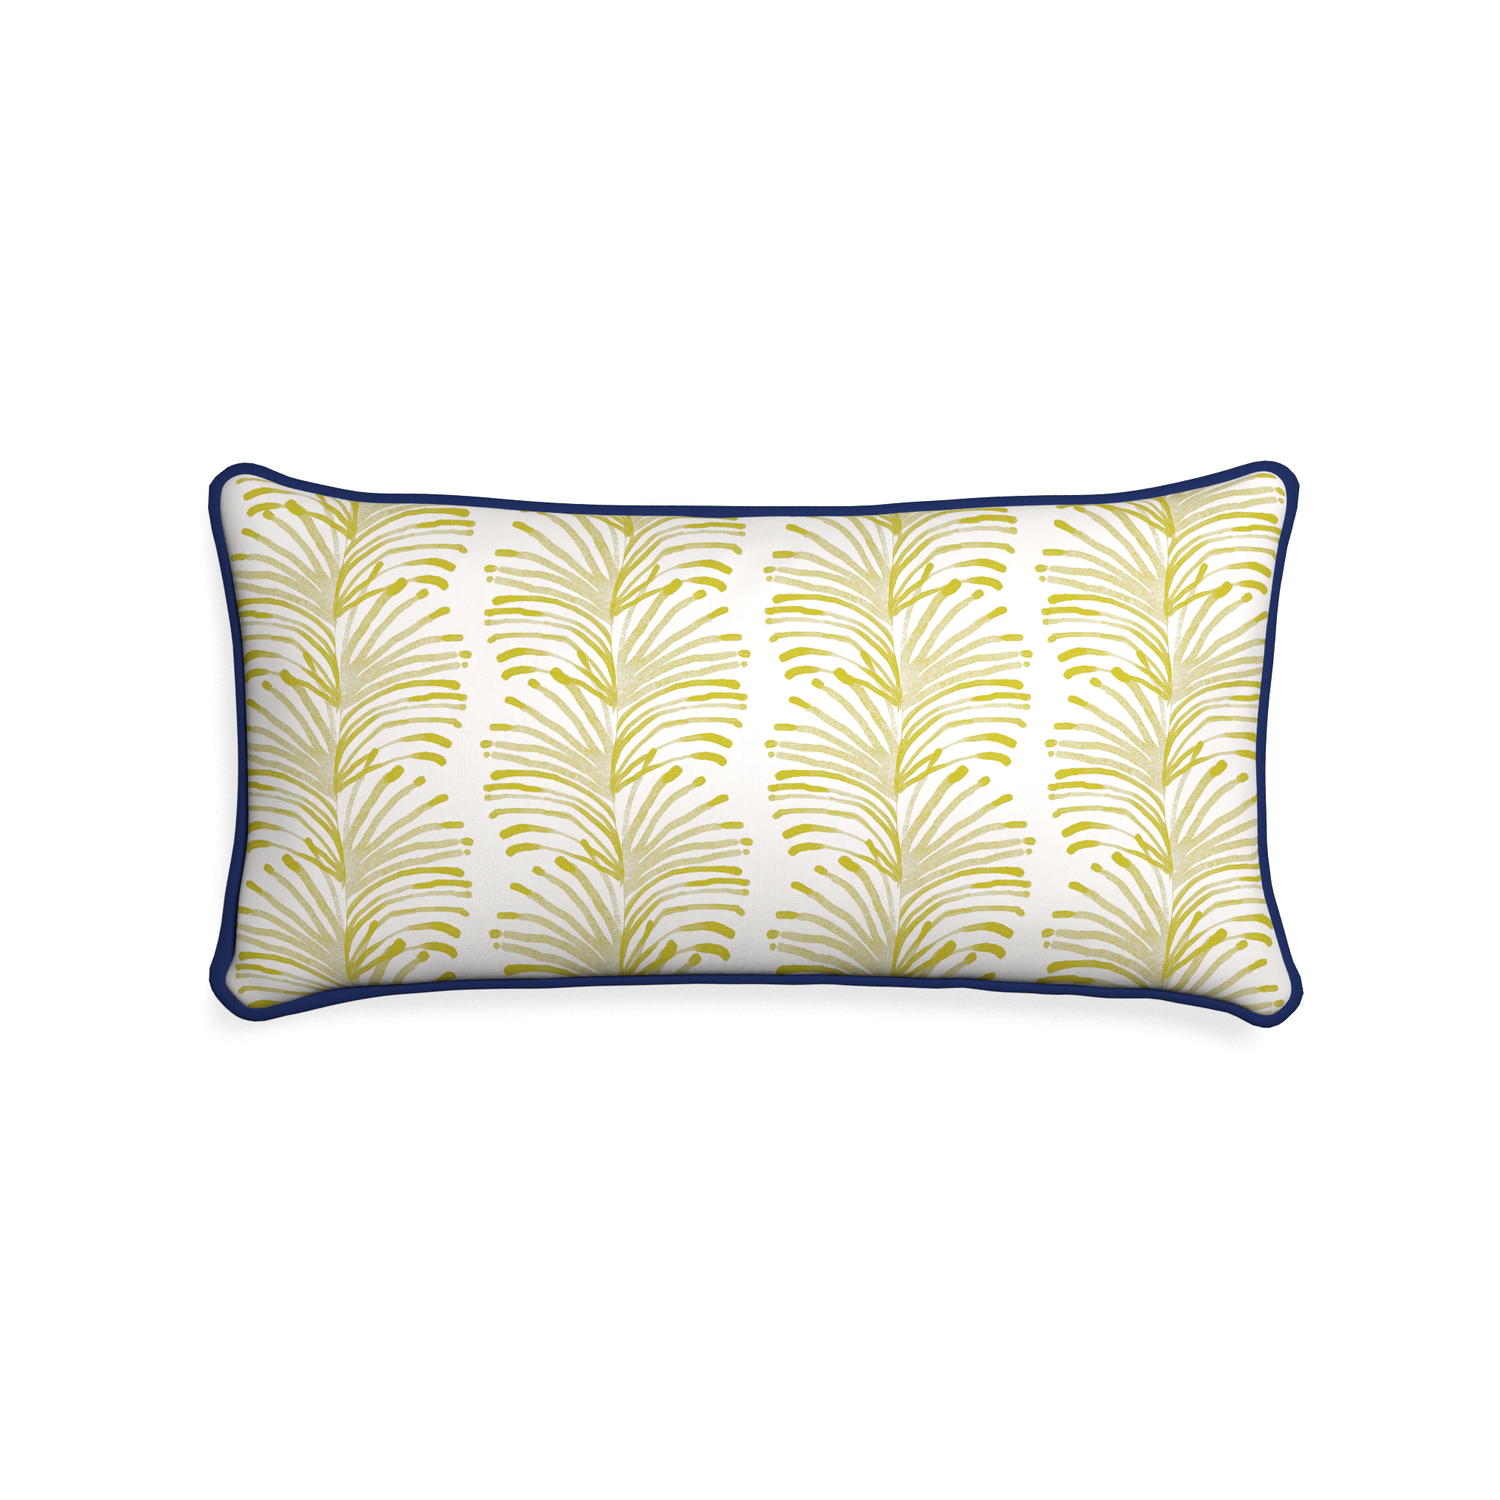 Midi-lumbar emma chartreuse custom yellow stripe chartreusepillow with midnight piping on white background